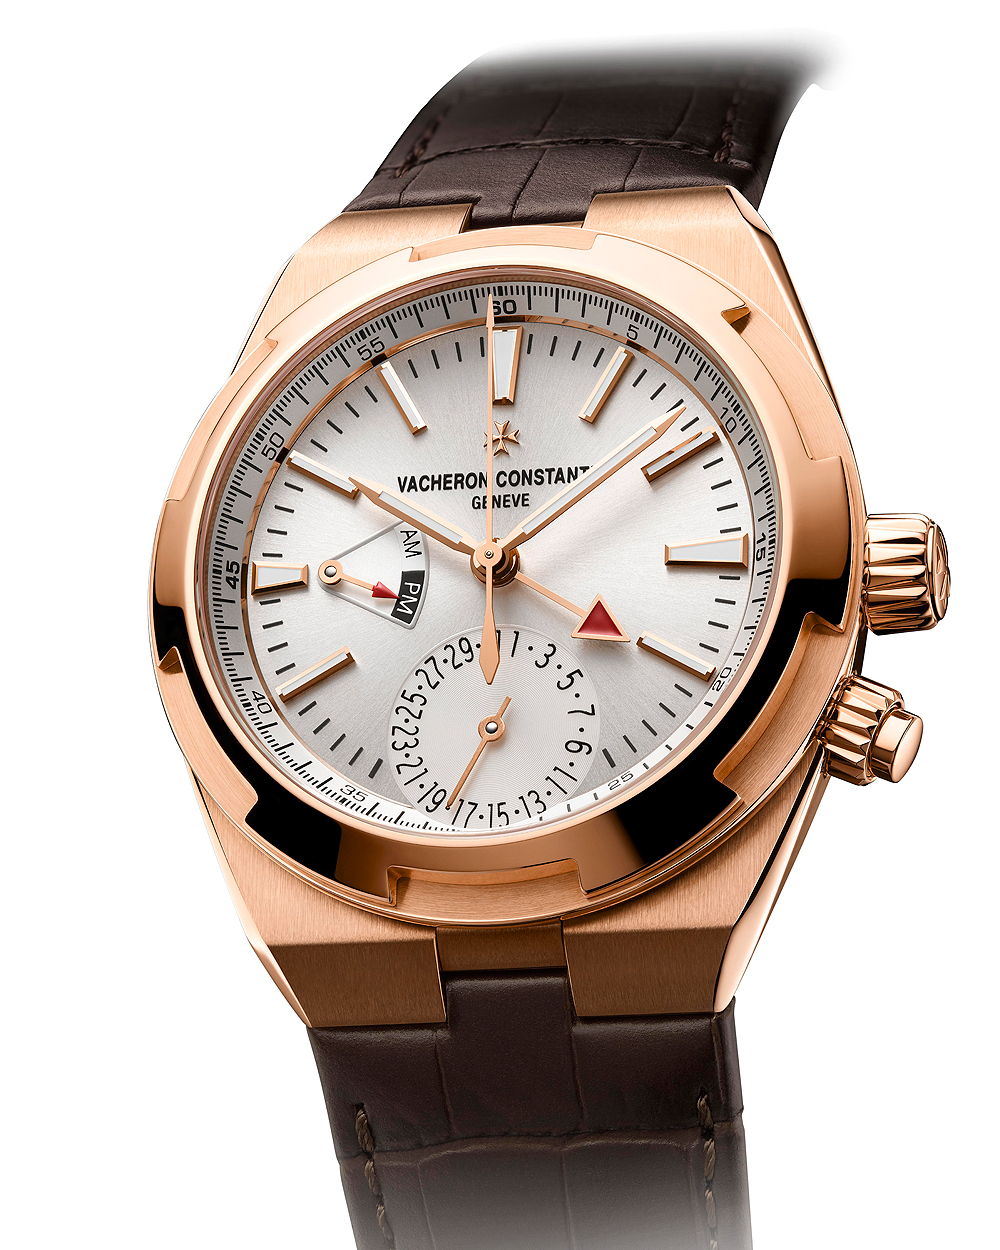 Vacheron Constantin Unveils New Overseas and Traditionnelle Models